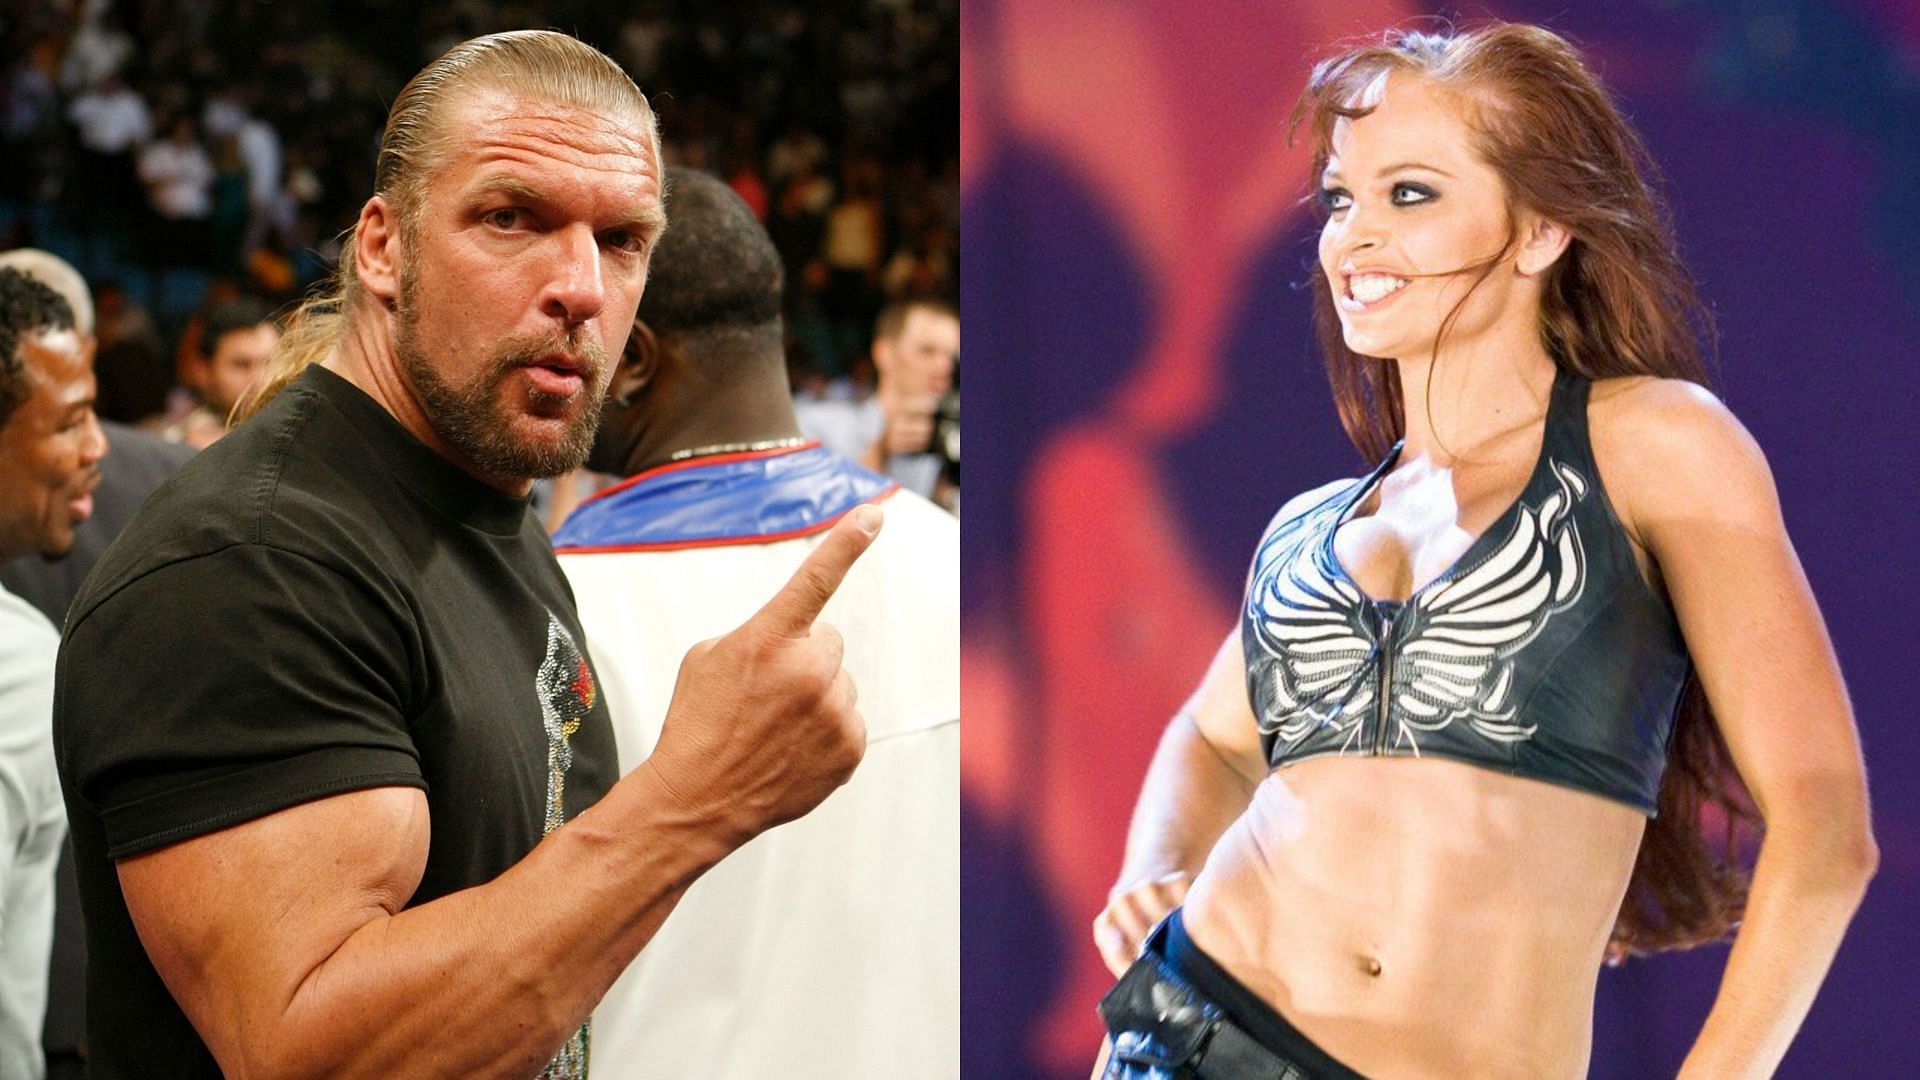 Rumors suggested that Triple H had an affair with Christy Hemme in 2005